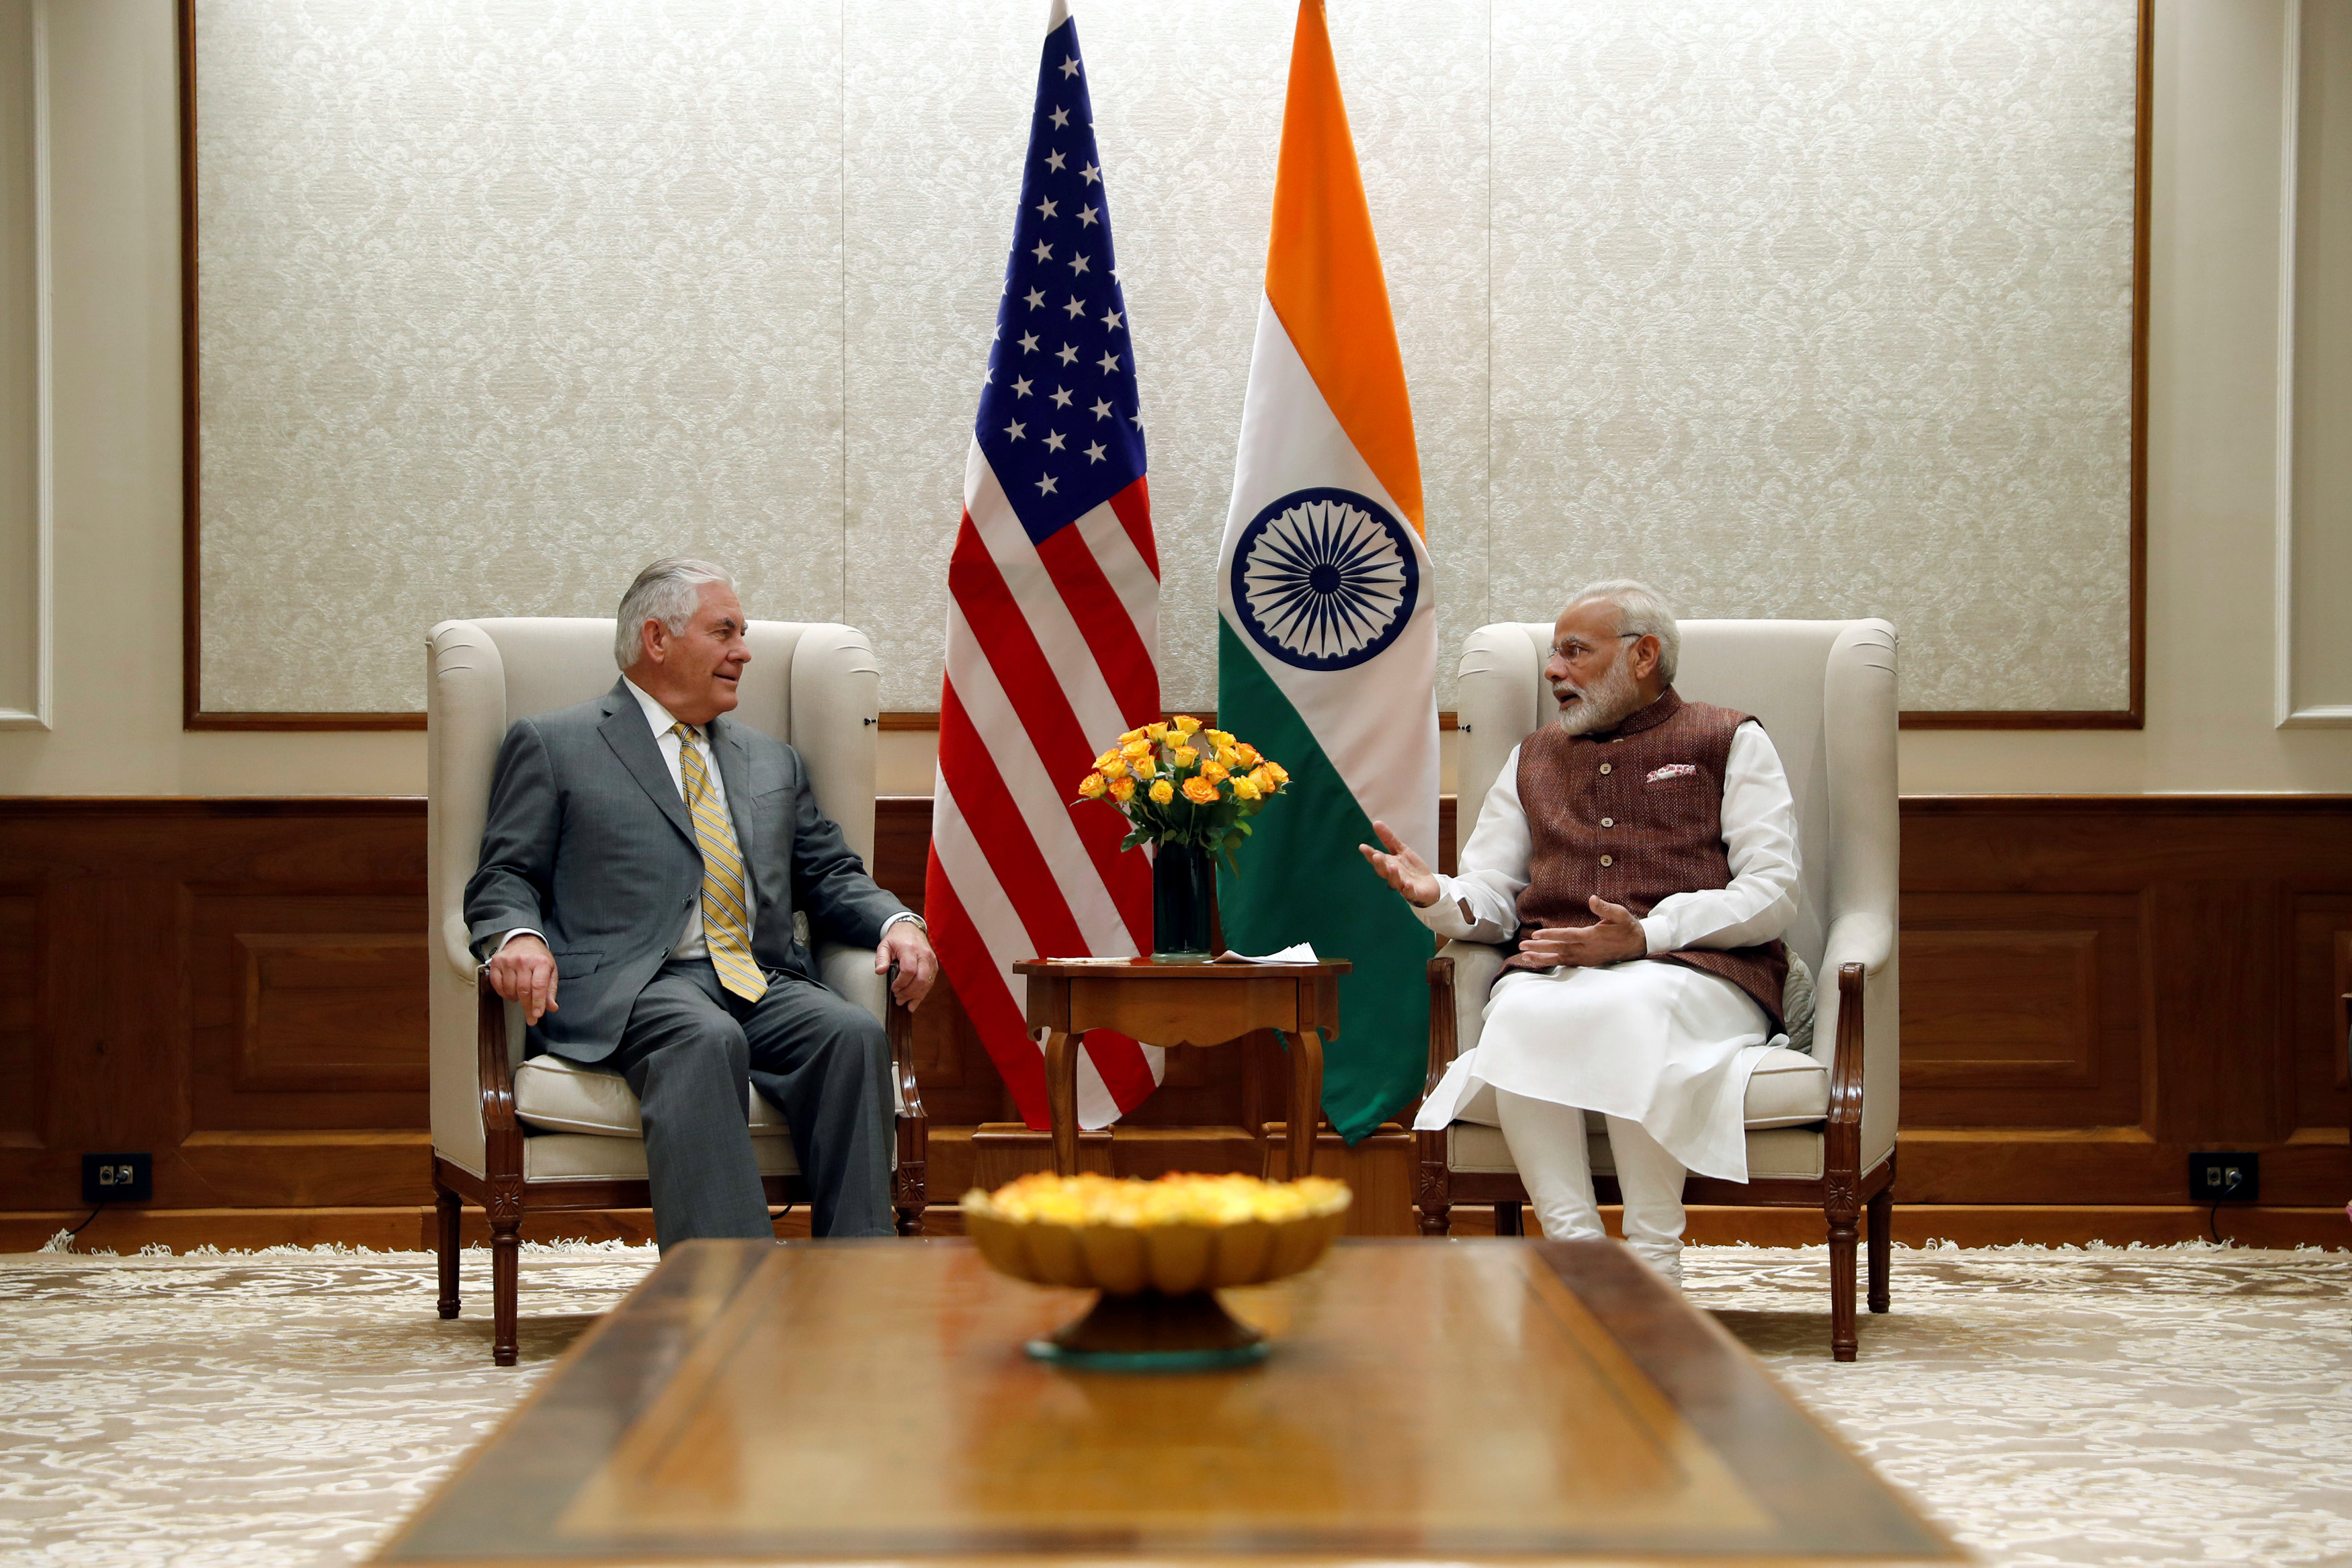 2017-10-25T120027Z_1569122748_RC12CACE5960_RTRMADP_3_TILLERSON-ASIA-INDIA